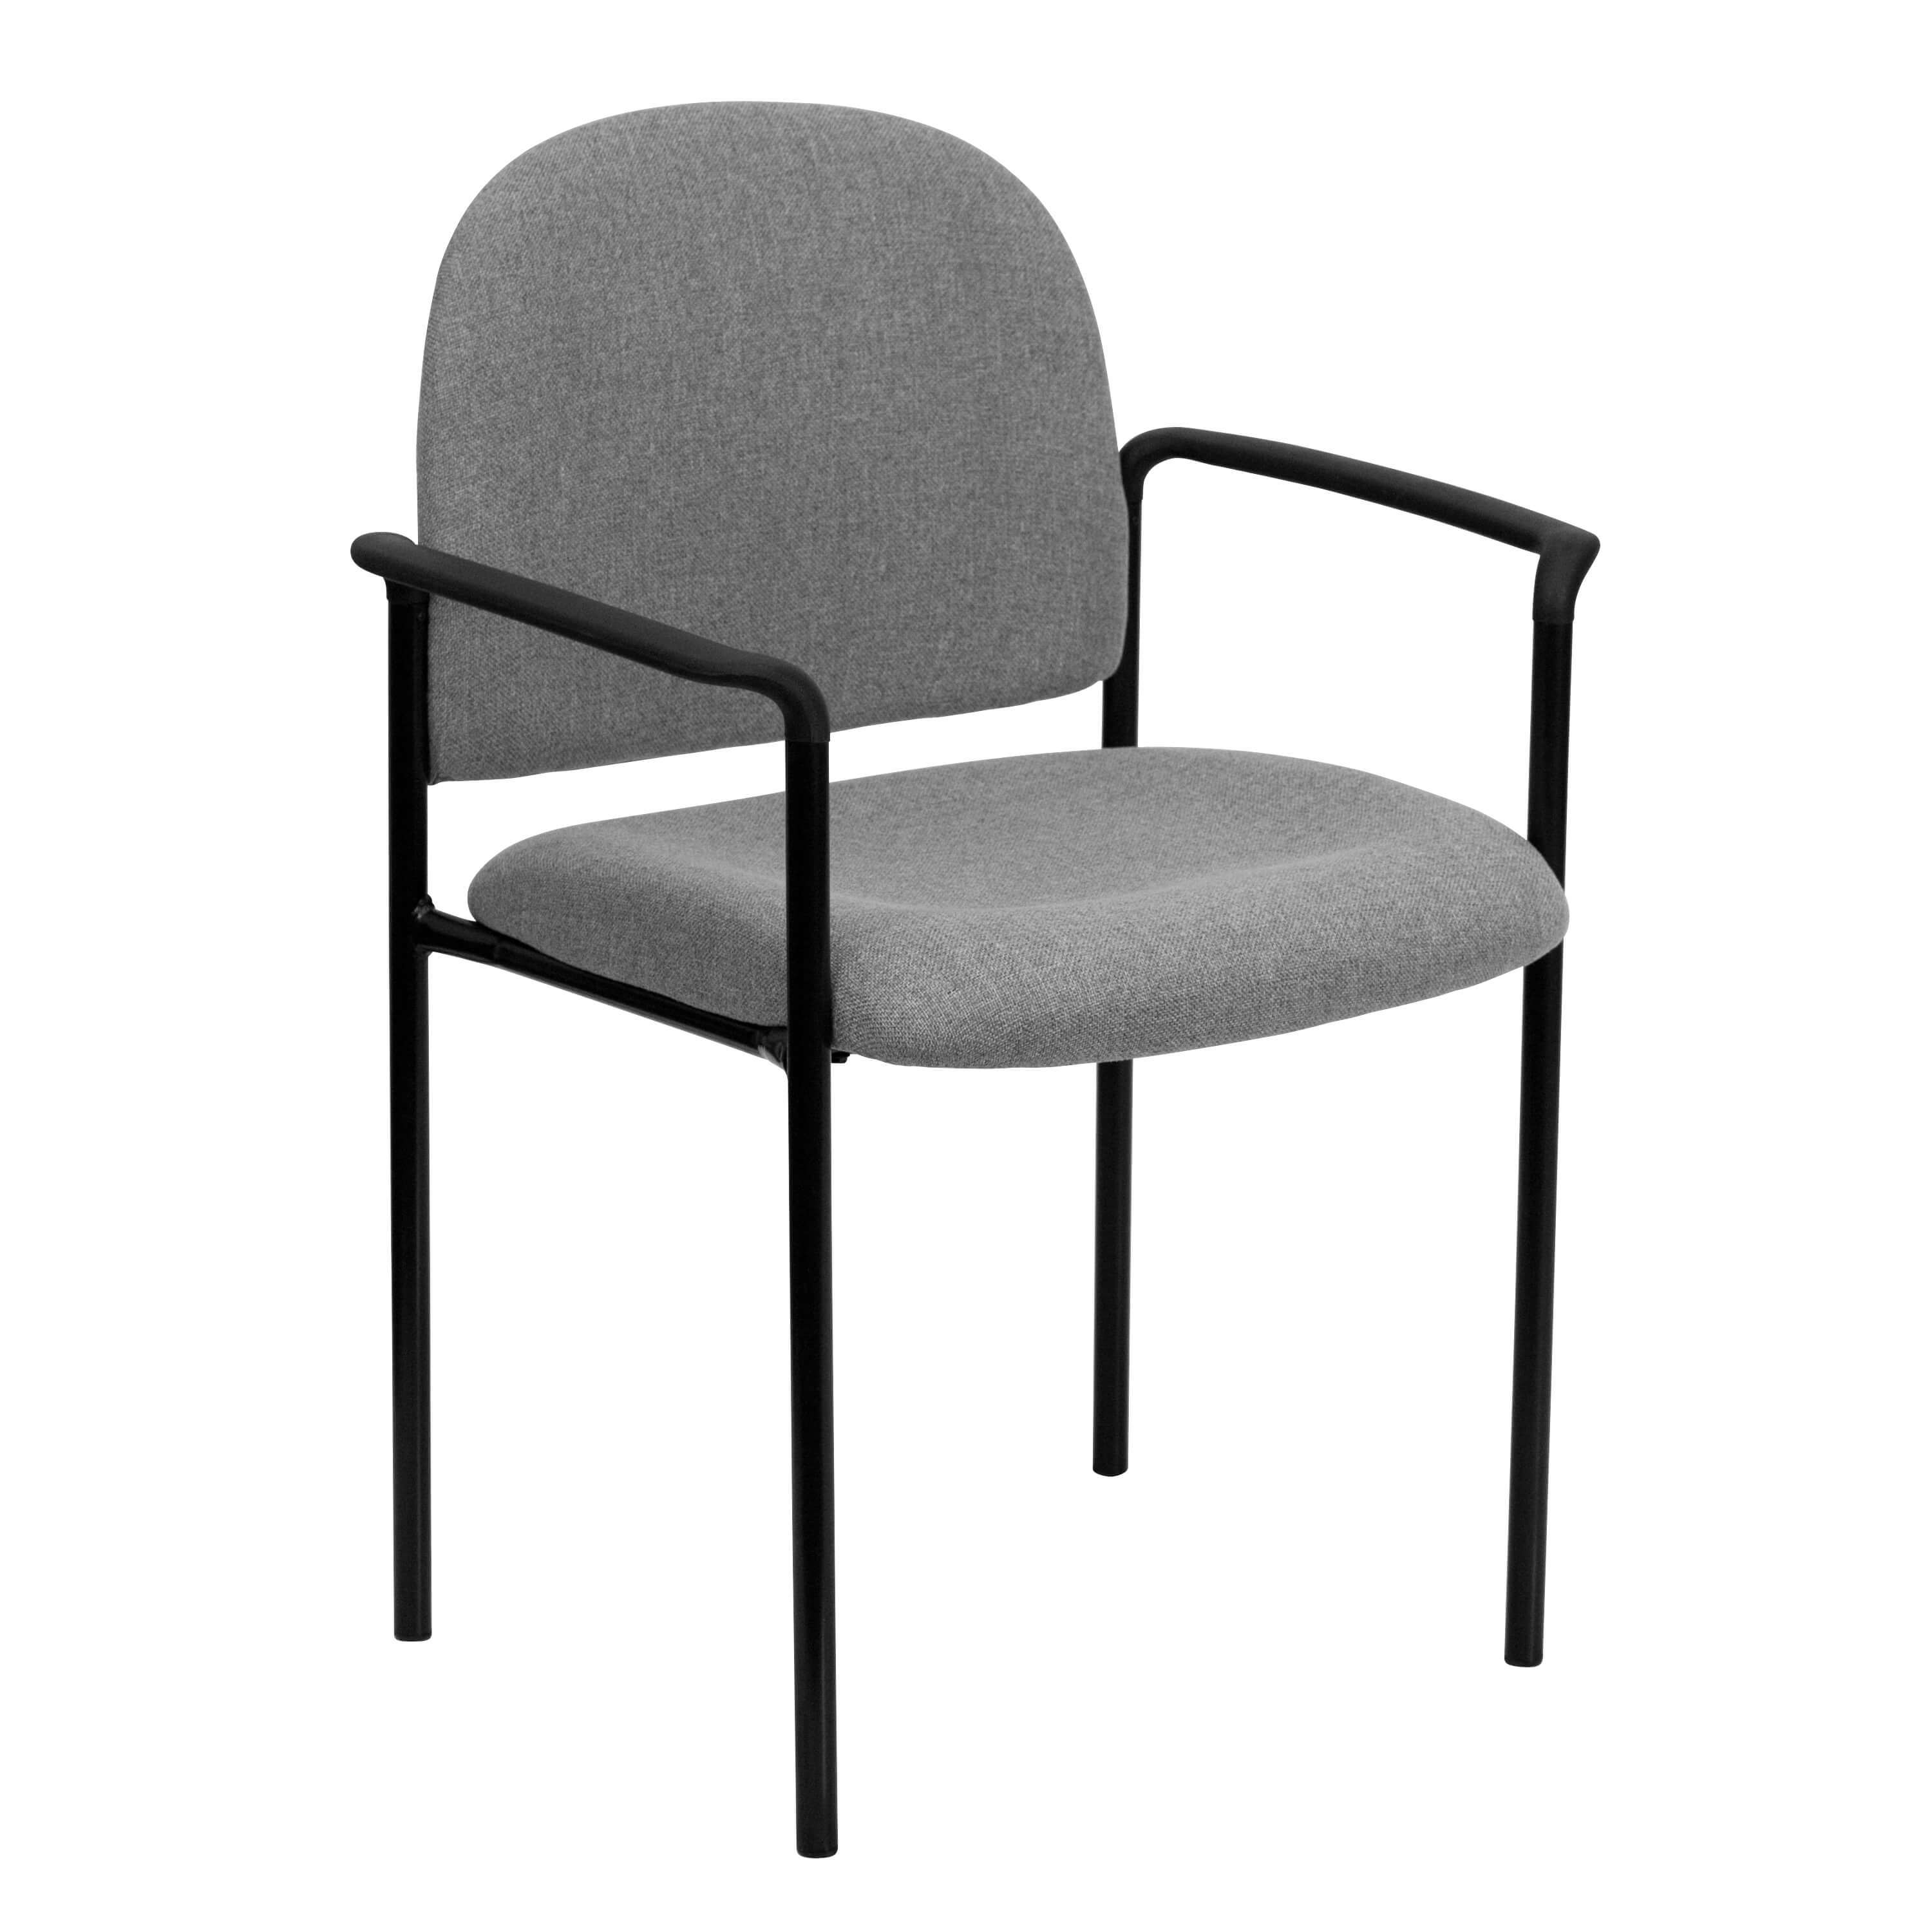 office-waiting-room-chairs-stackable-conference-chairs.jpg